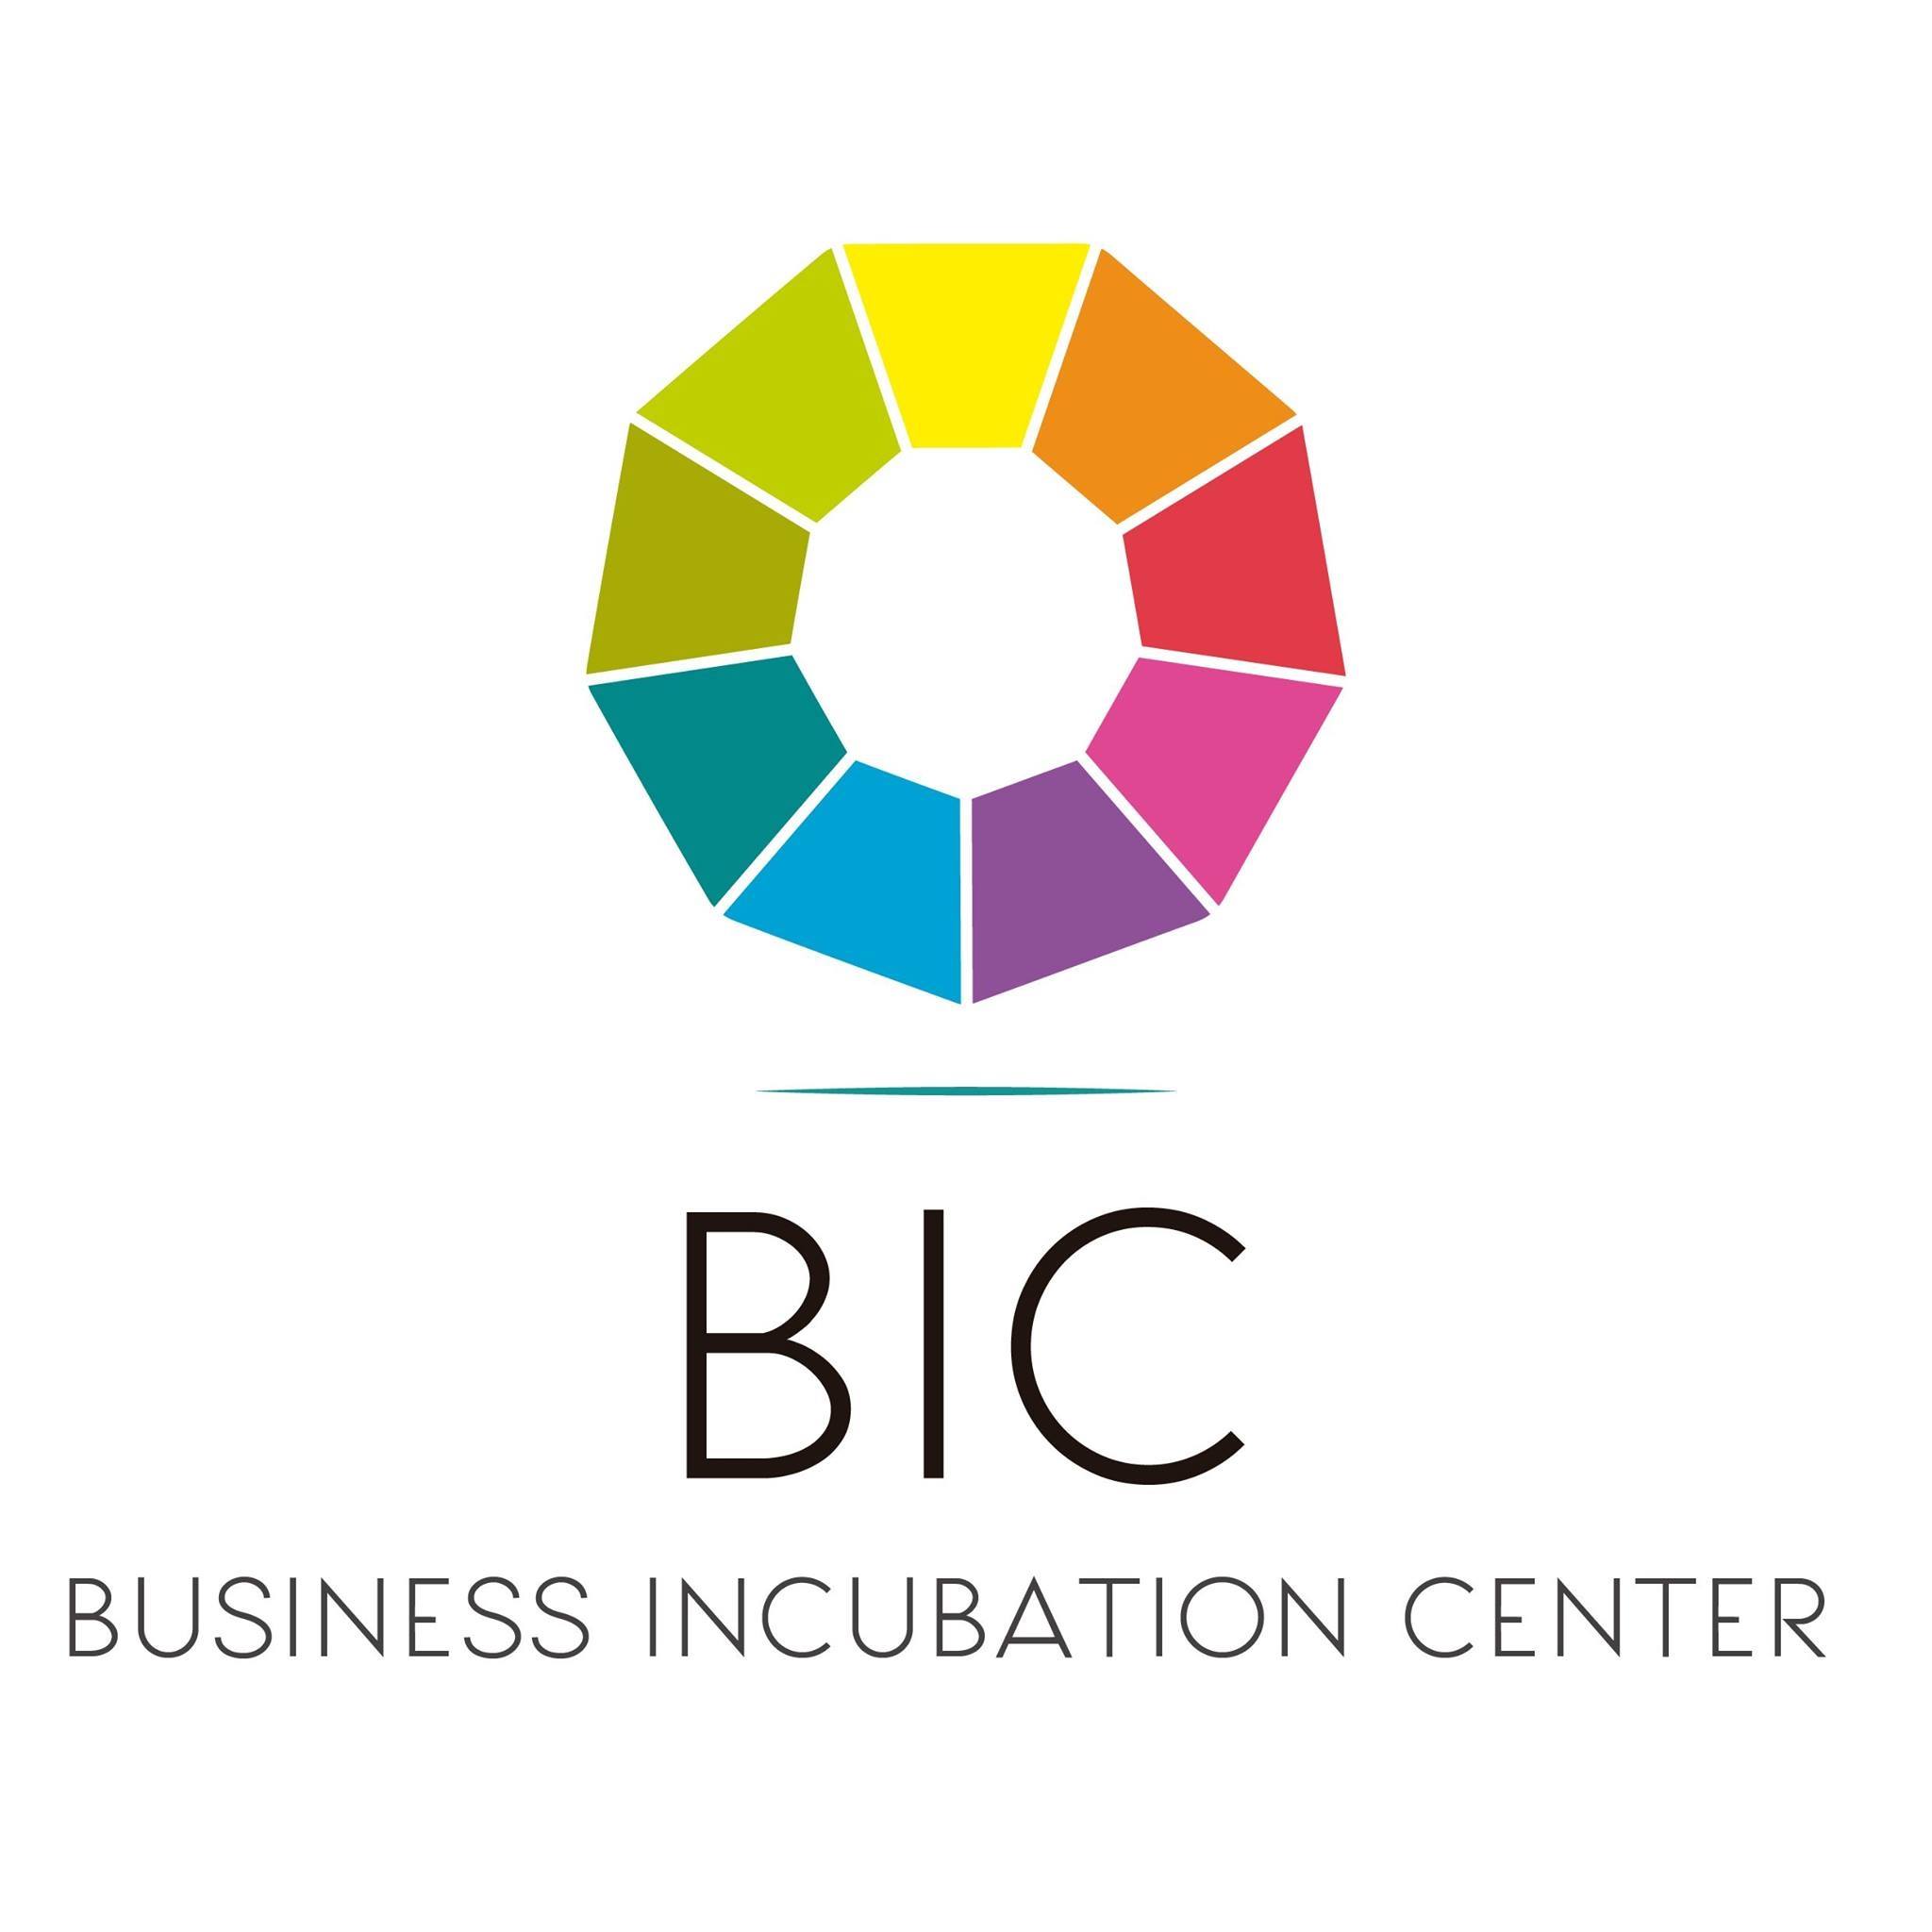 BIC - Business Incubation Center